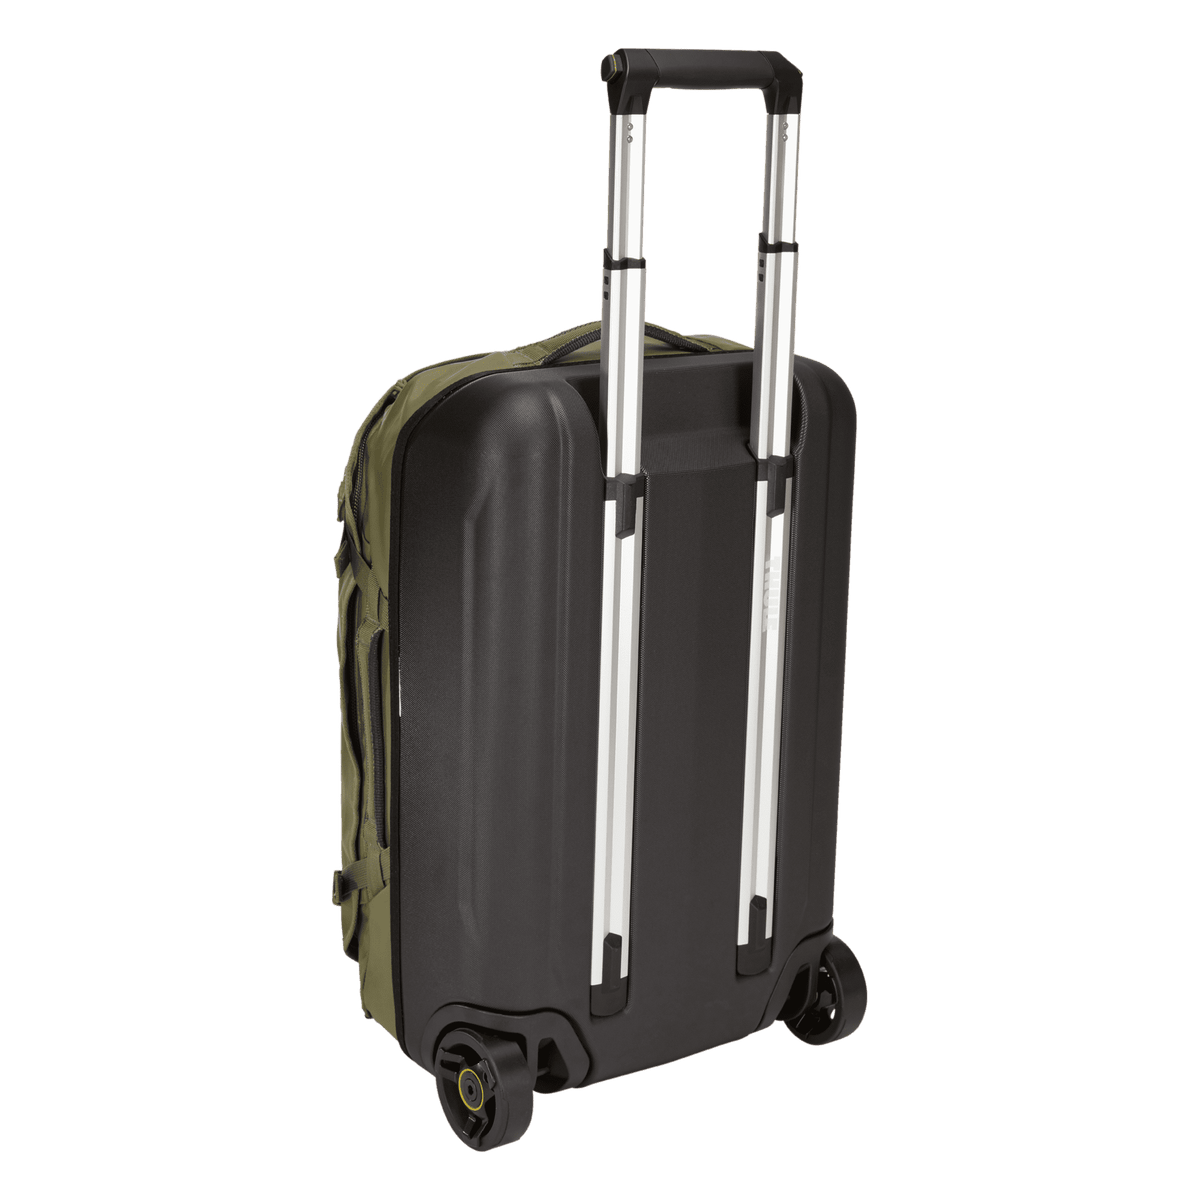 Thule Chasm Carry On Wheeled Duffel Bag 40L